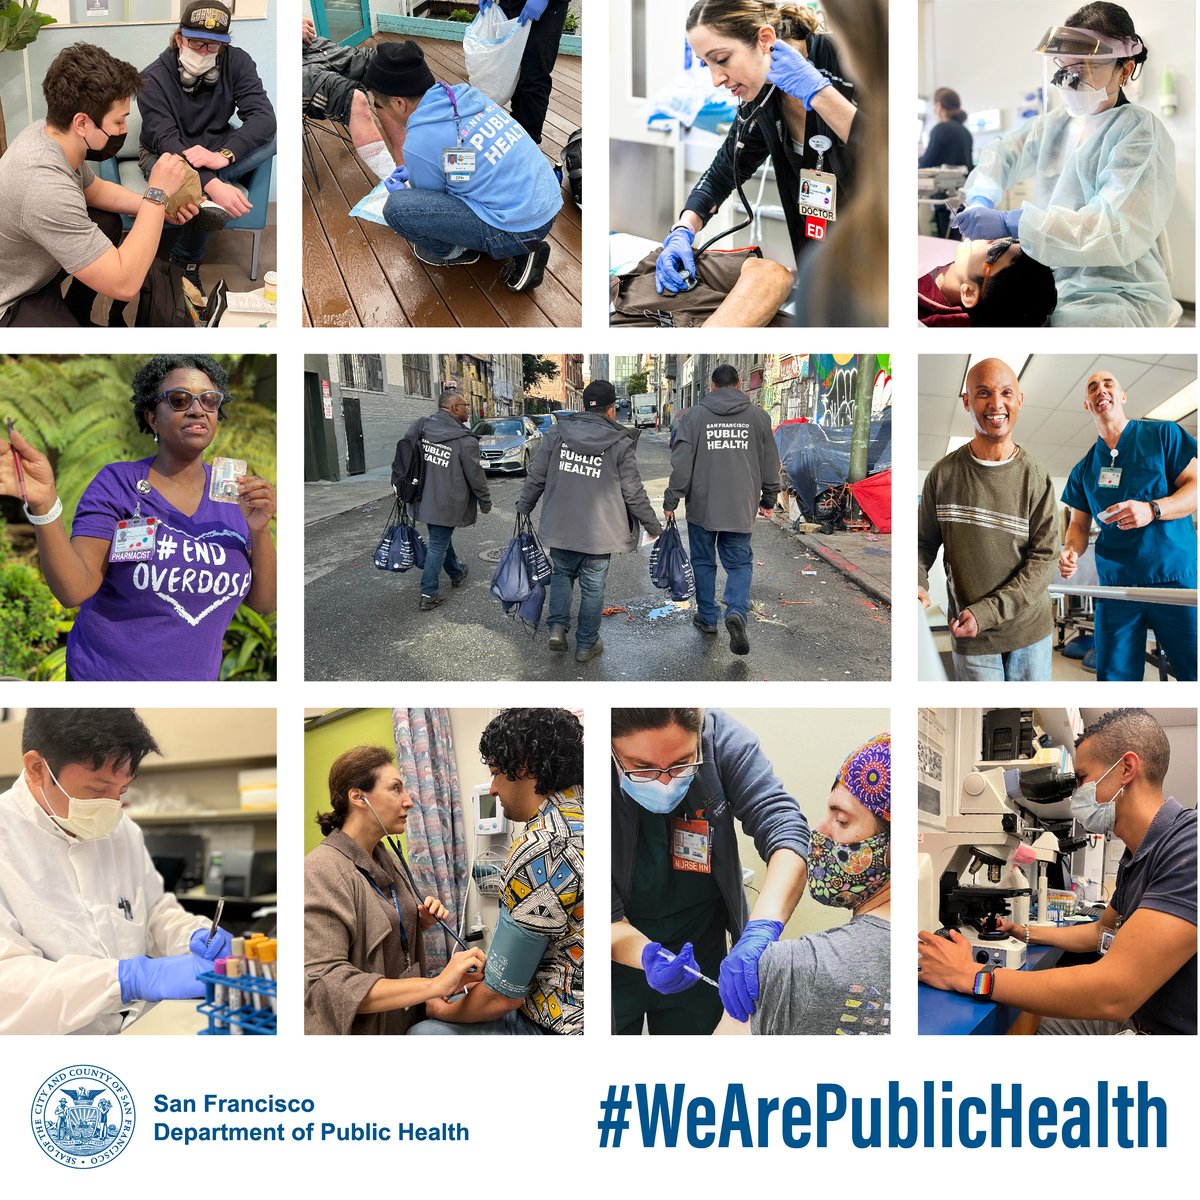 From providing life-saving primary care across #SF; keeping our water and food safe; protecting the community from infectious disease; or upgrading #infrastructure for safer spaces – we provide quality care to everyone, no matter their situation. #healthequity #PublicHealthWeek